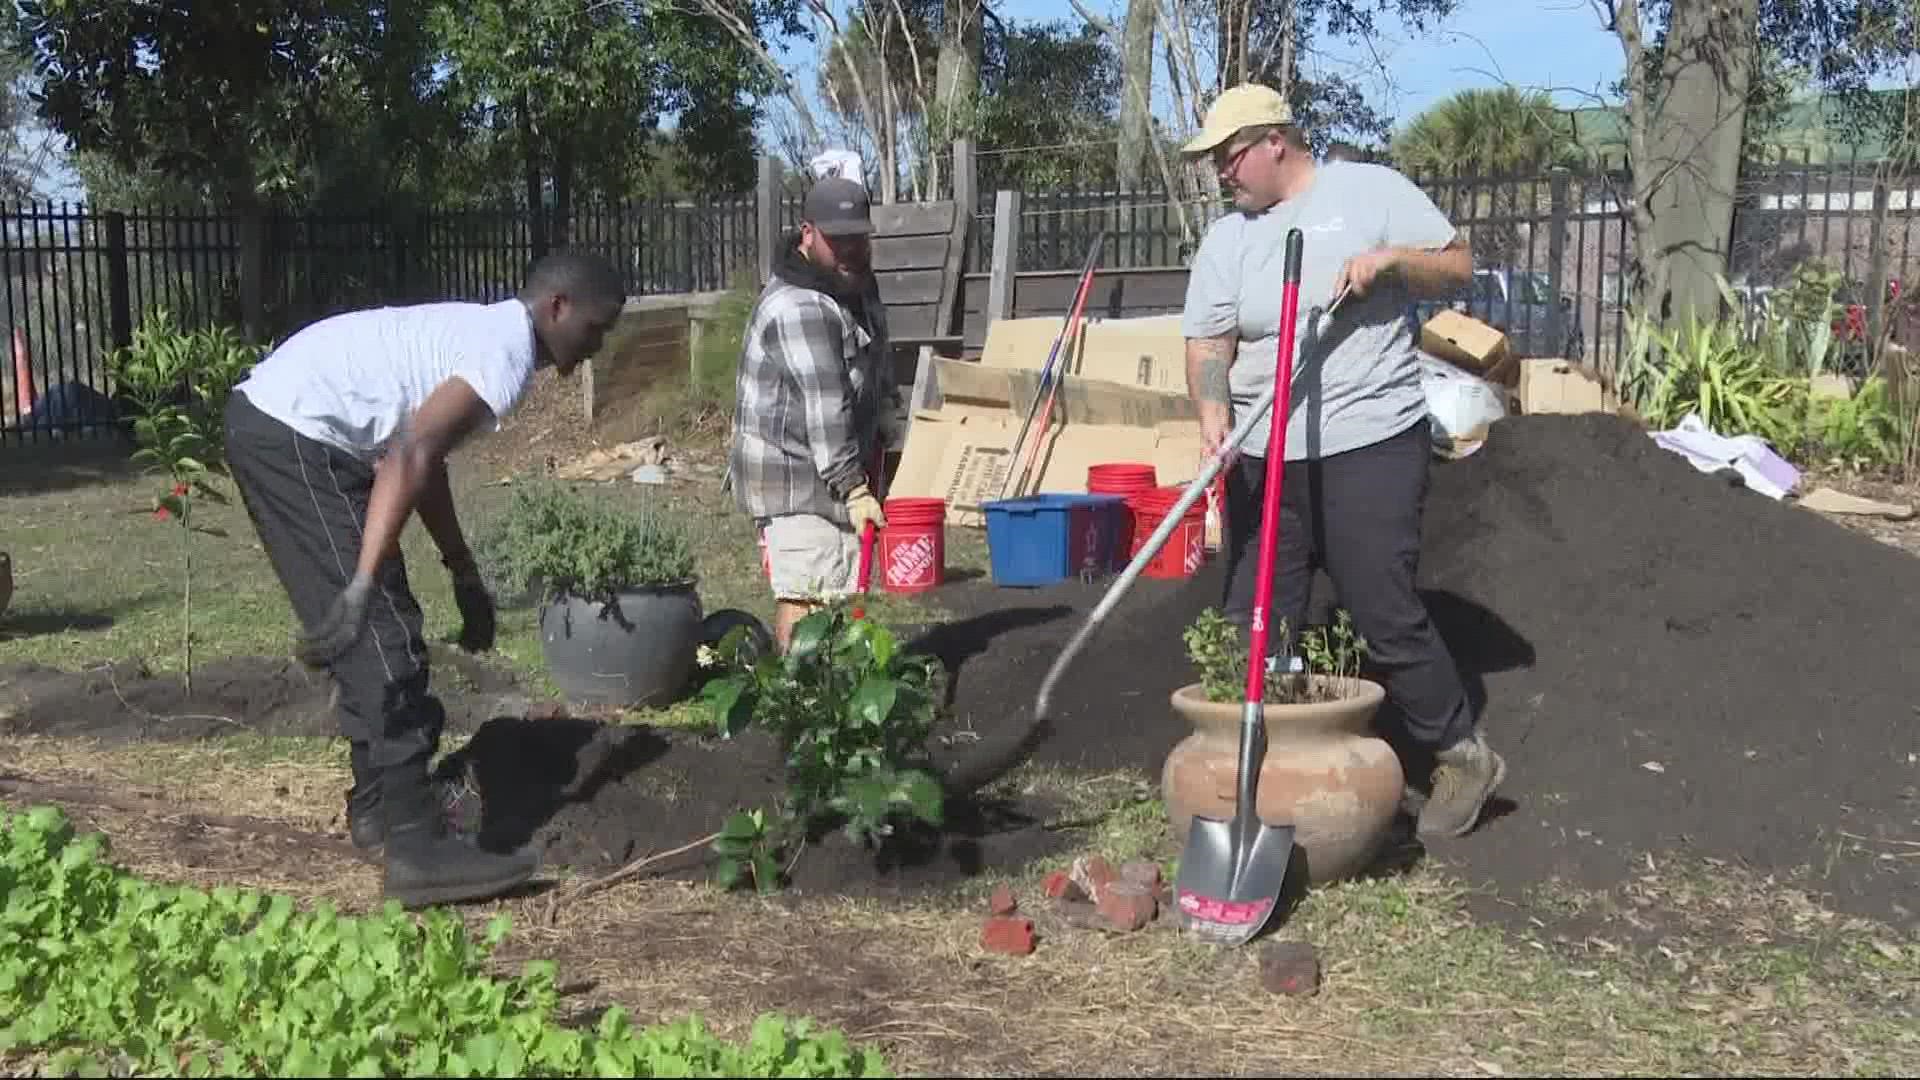 Clara White Mission hopes to feed the community with food grown by the community